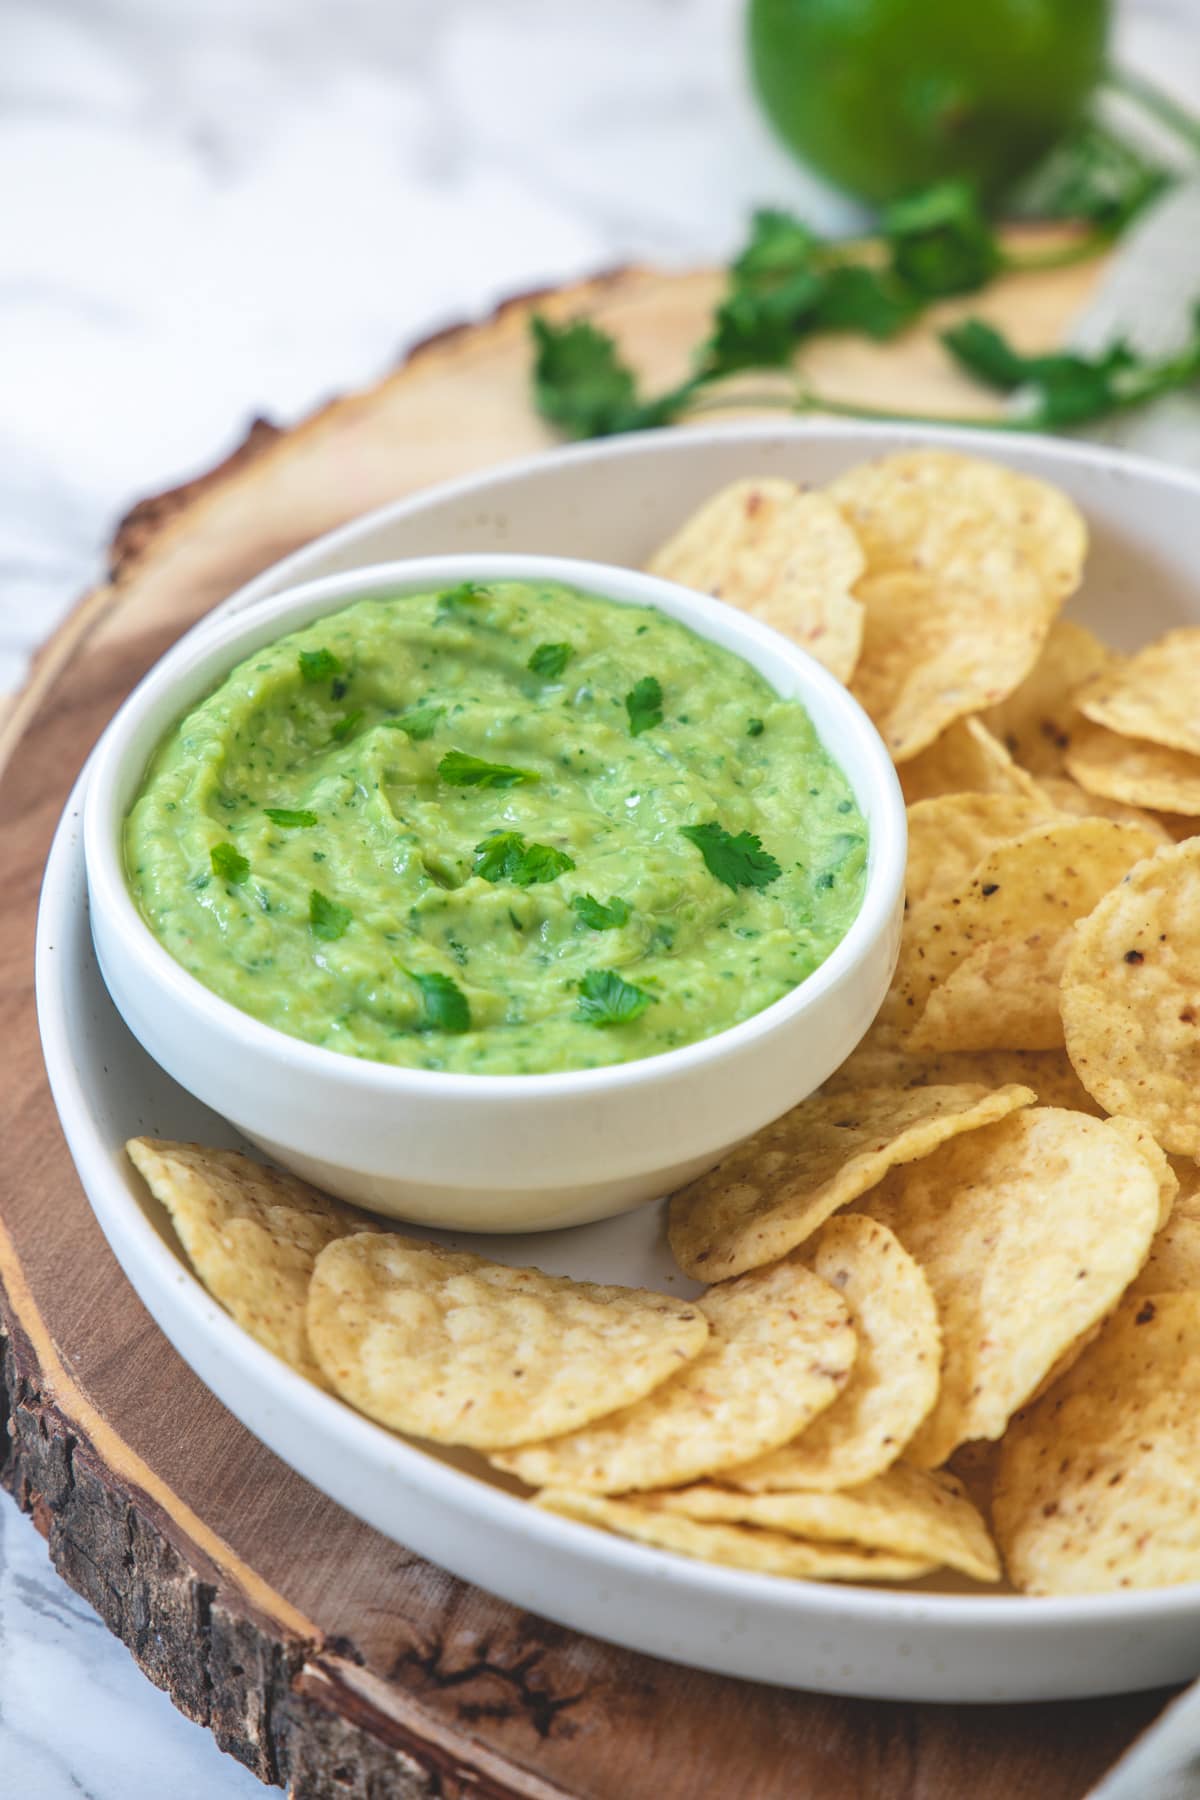 Avocado dip served with round torilla chips on a wooden board.